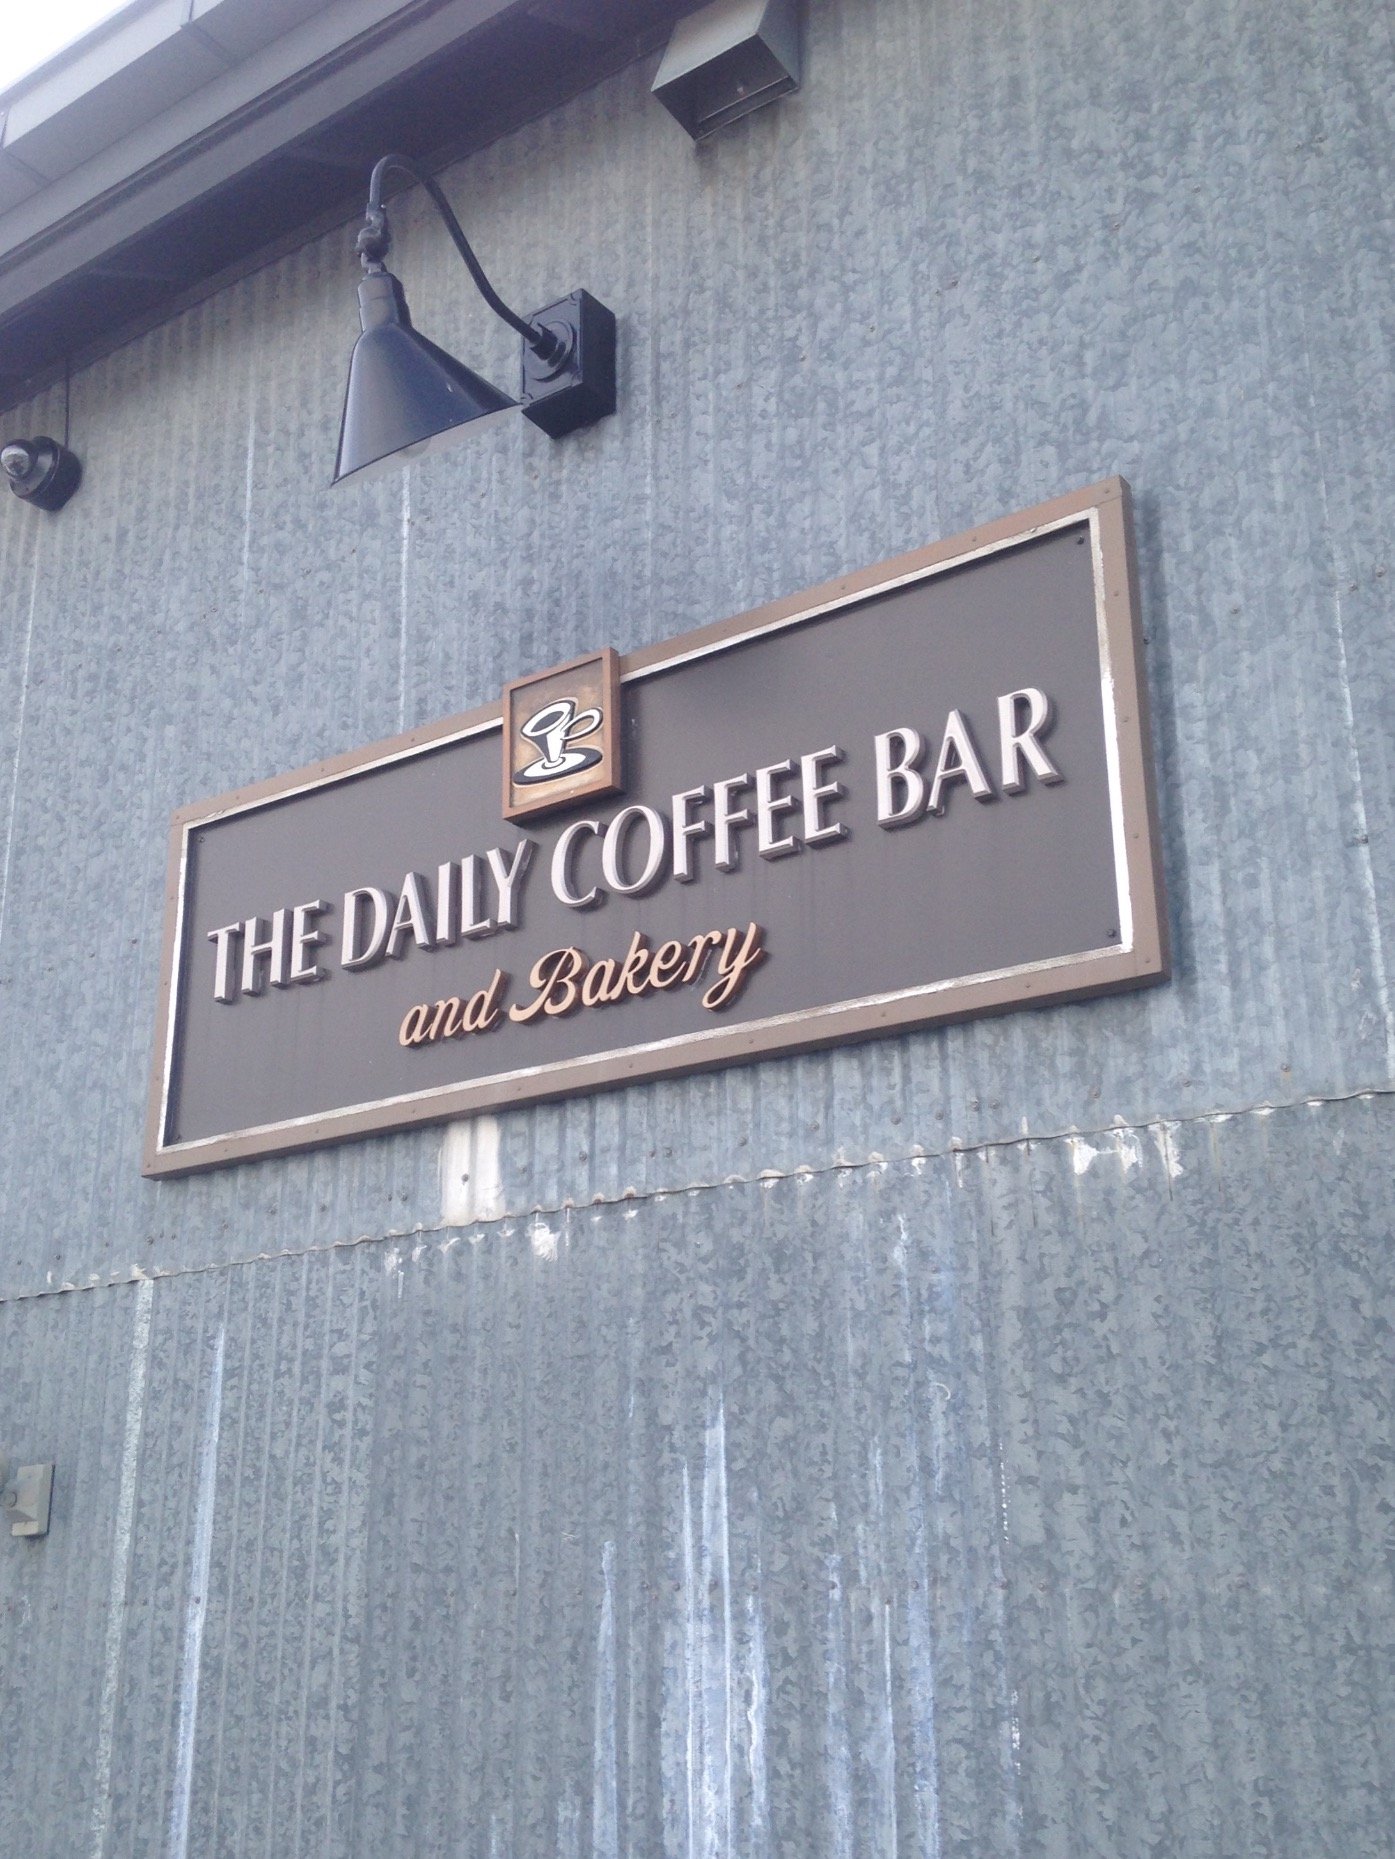 The Daily Coffee Bar is a comfortable gathering place in Bozeman Montana.We share our love of exceptional coffee and healthy nourishing foods with our community